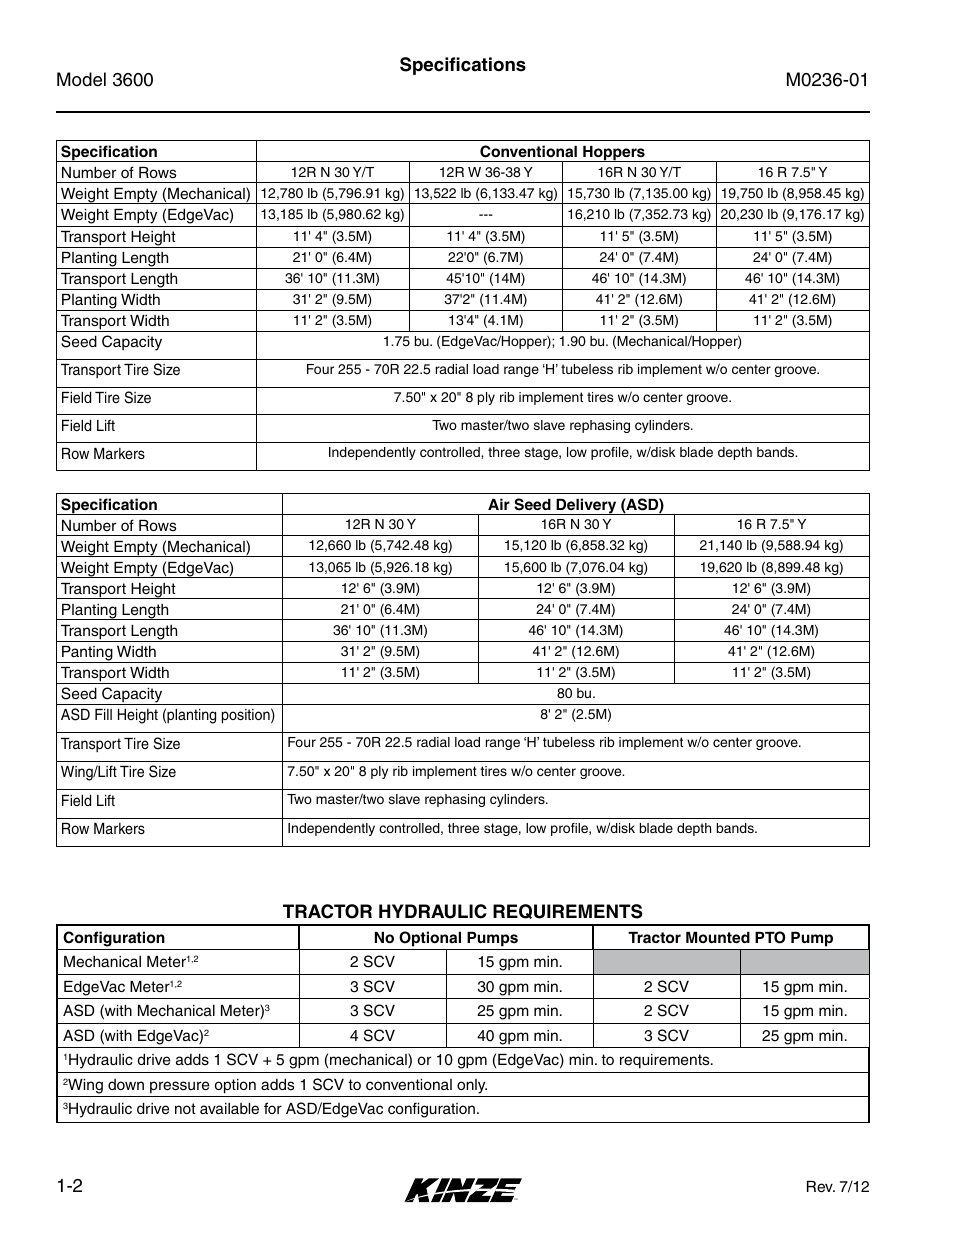 Specifications, Specifications -2, Tractor hydraulic requirements | Kinze 3600 Lift and Rotate Planter Rev. 7/14 User Manual | Page 8 / 172